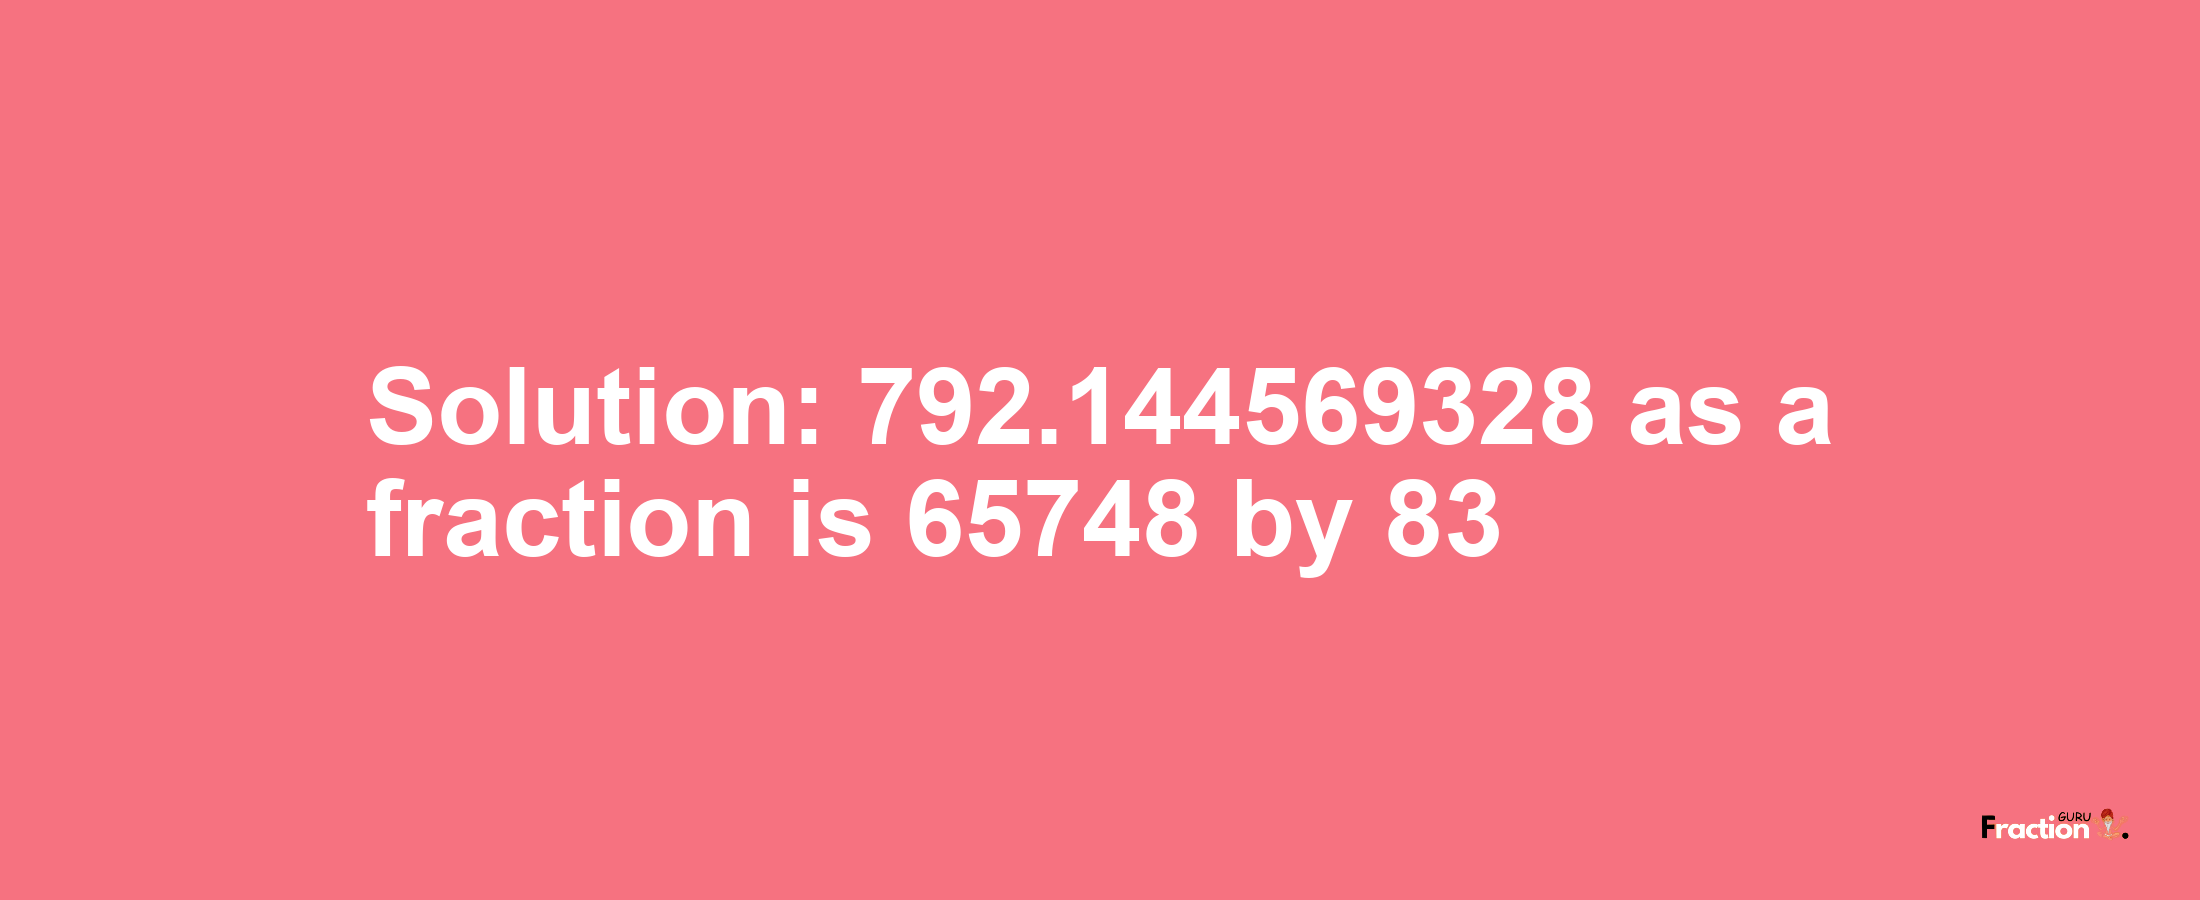 Solution:792.144569328 as a fraction is 65748/83